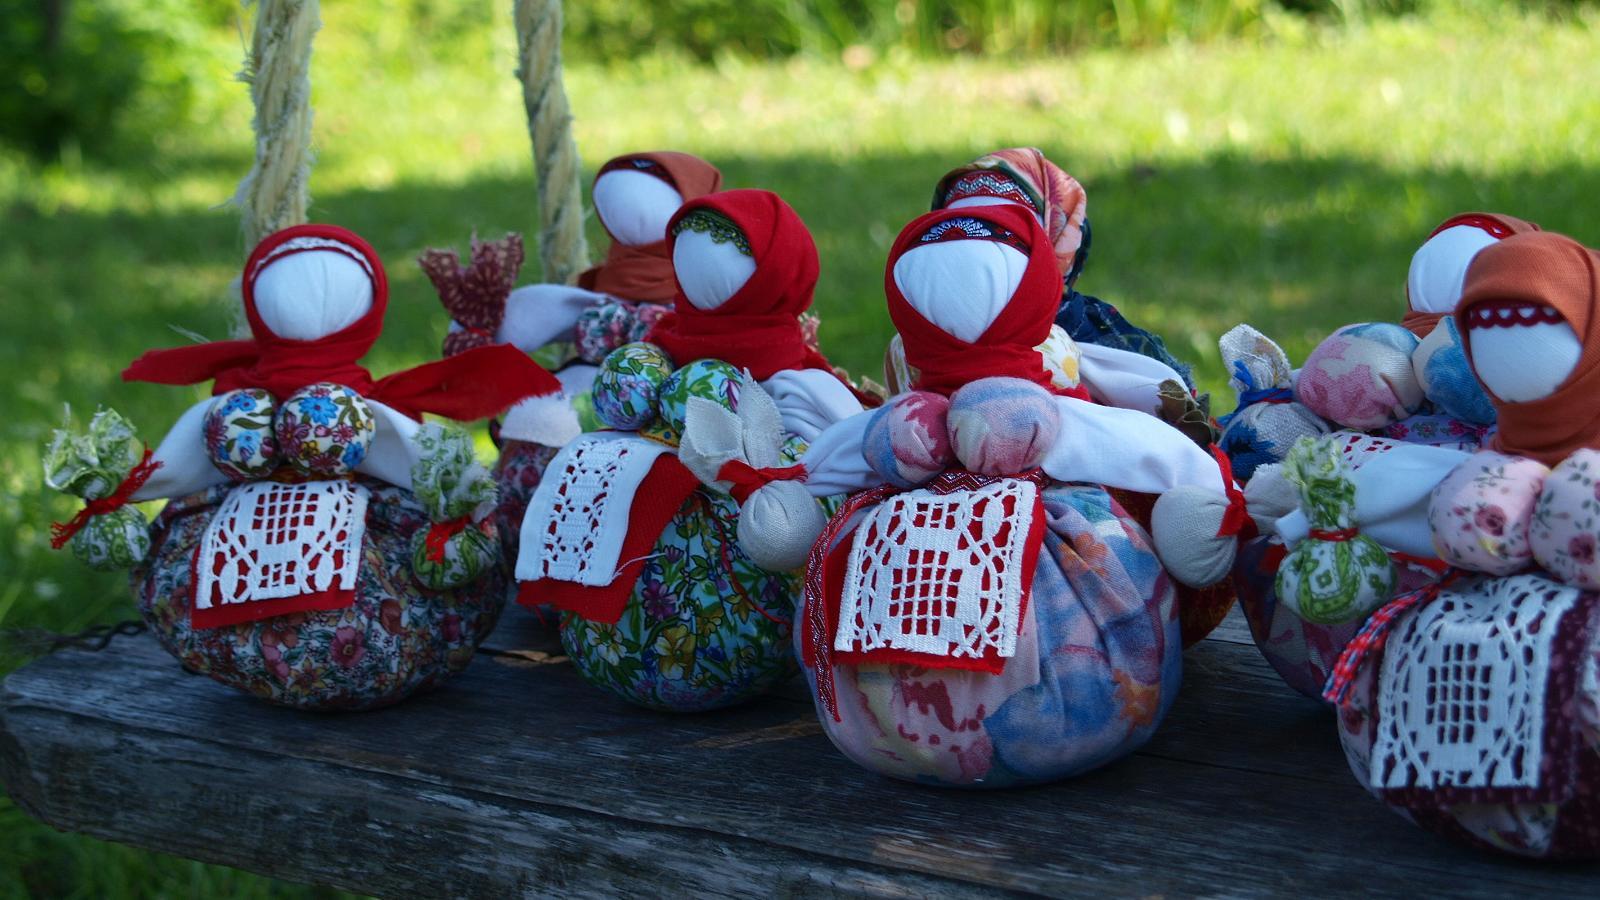 Workshop in a Russian farm for a doll filled with herbs (Travnitsa)